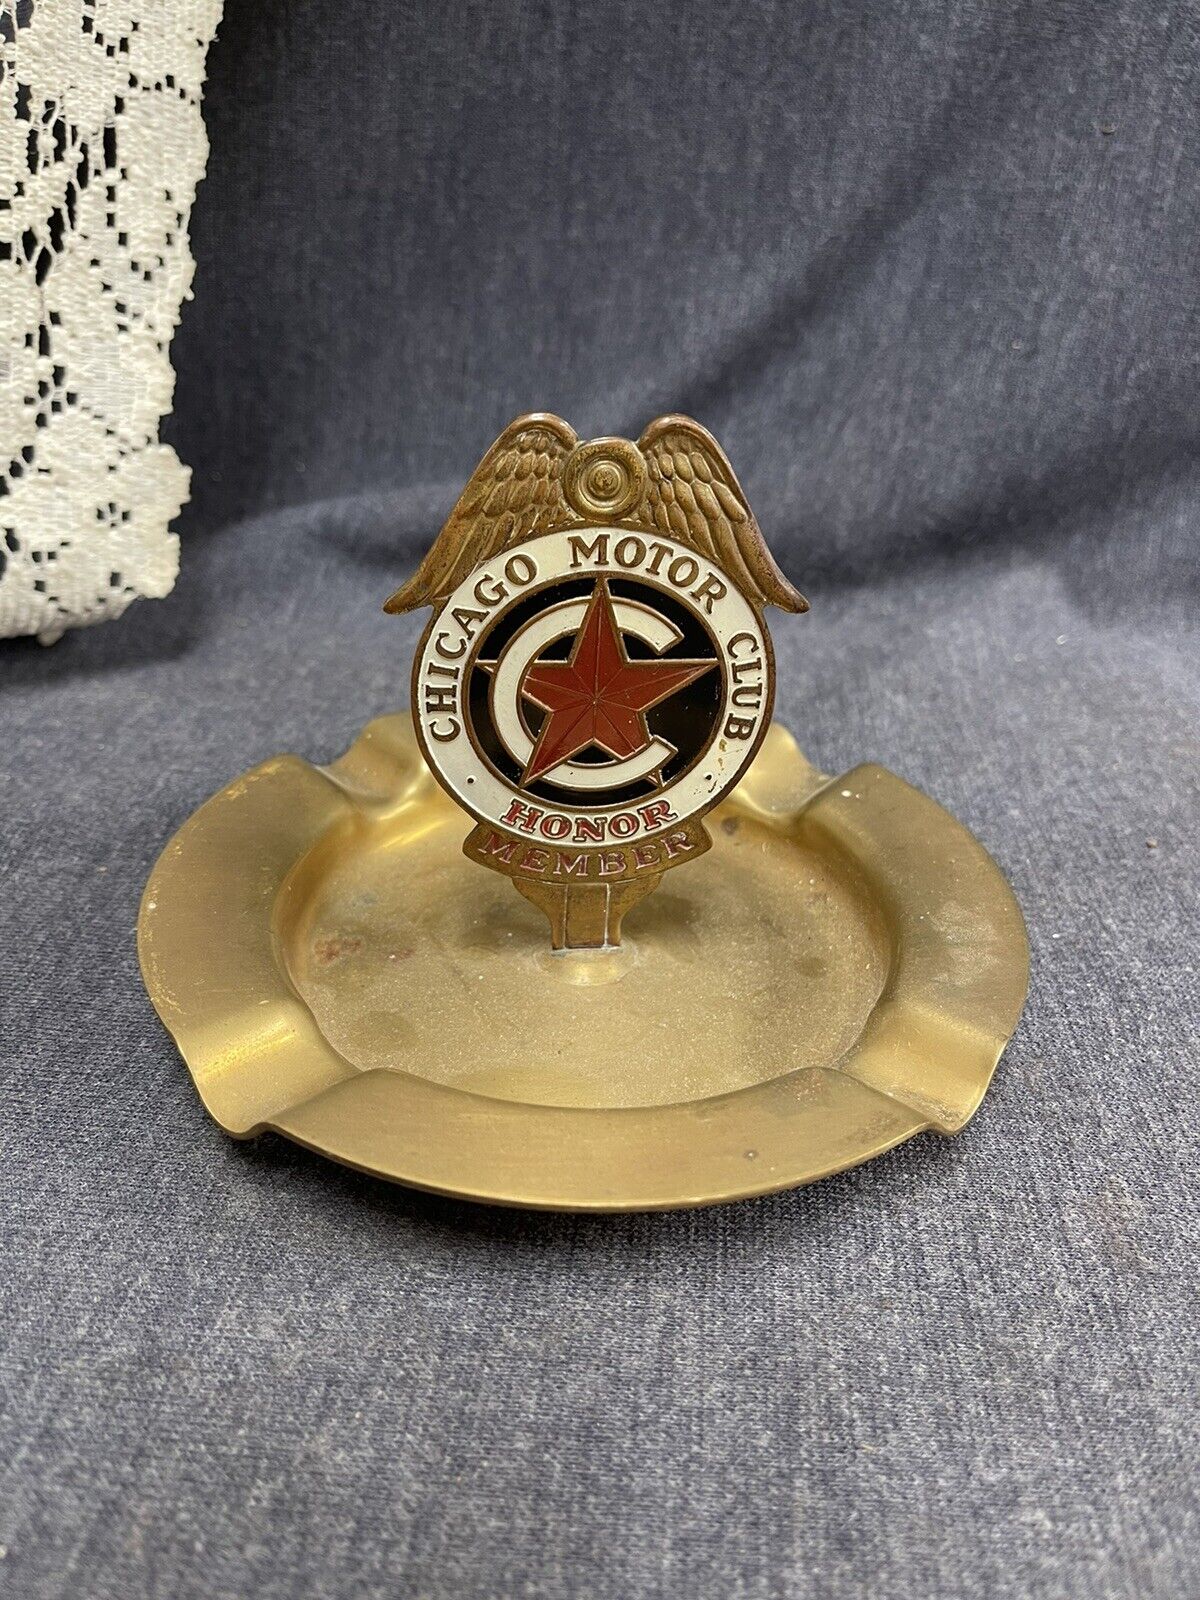 Vintage CHICAGO MOTOR CLUB HONOR MEMBER DOUBLE SIDED ASHTRAY CIGAR CIGARETTE